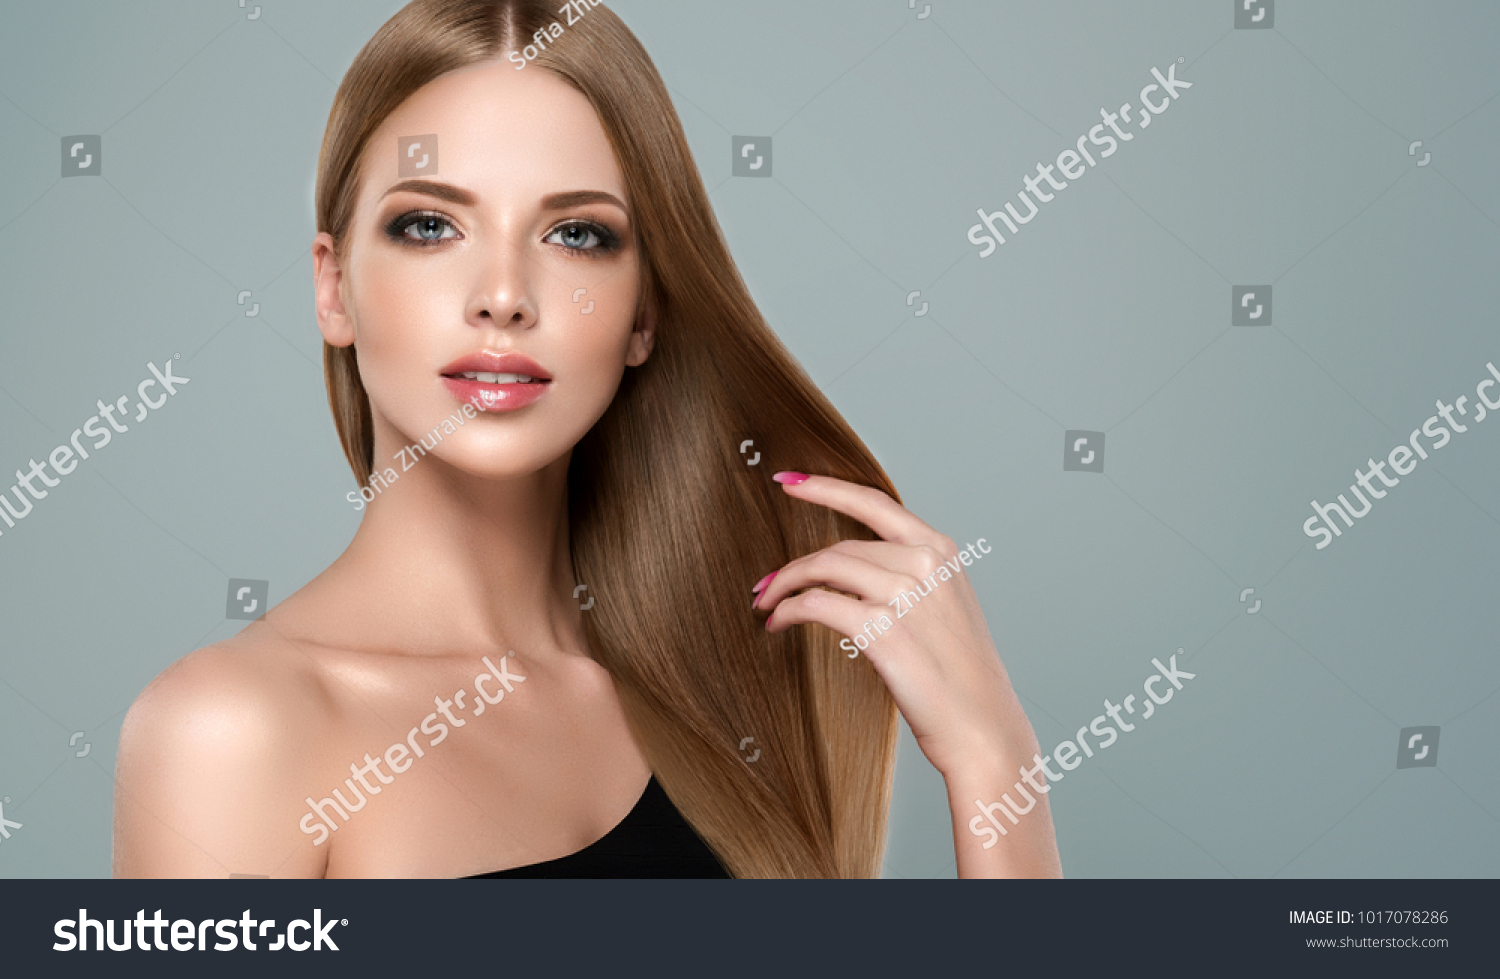 Beautiful model girl with shiny brown and straight long hair. Keratin  straightening. Treatment, care and spa procedures. Smooth hairstyle #1017078286